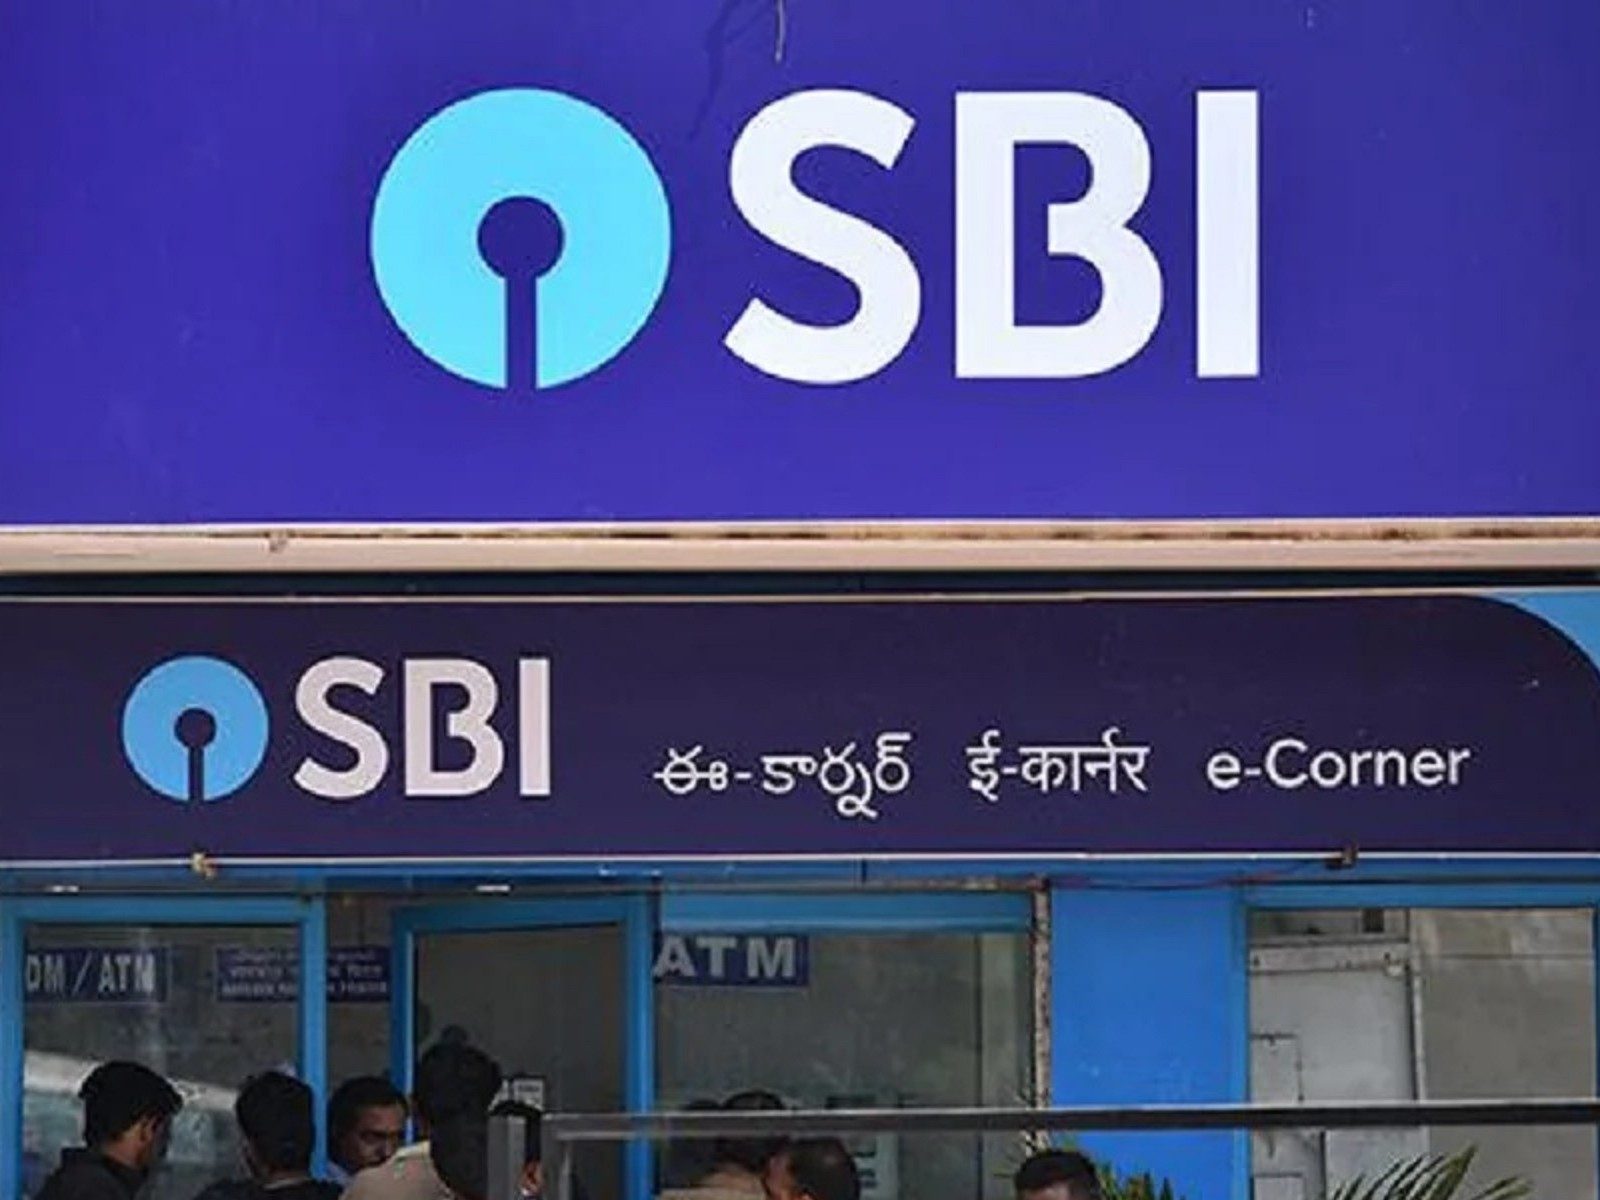 SBI warns of intermittent fluctuations in YONO services. Details here | Mint